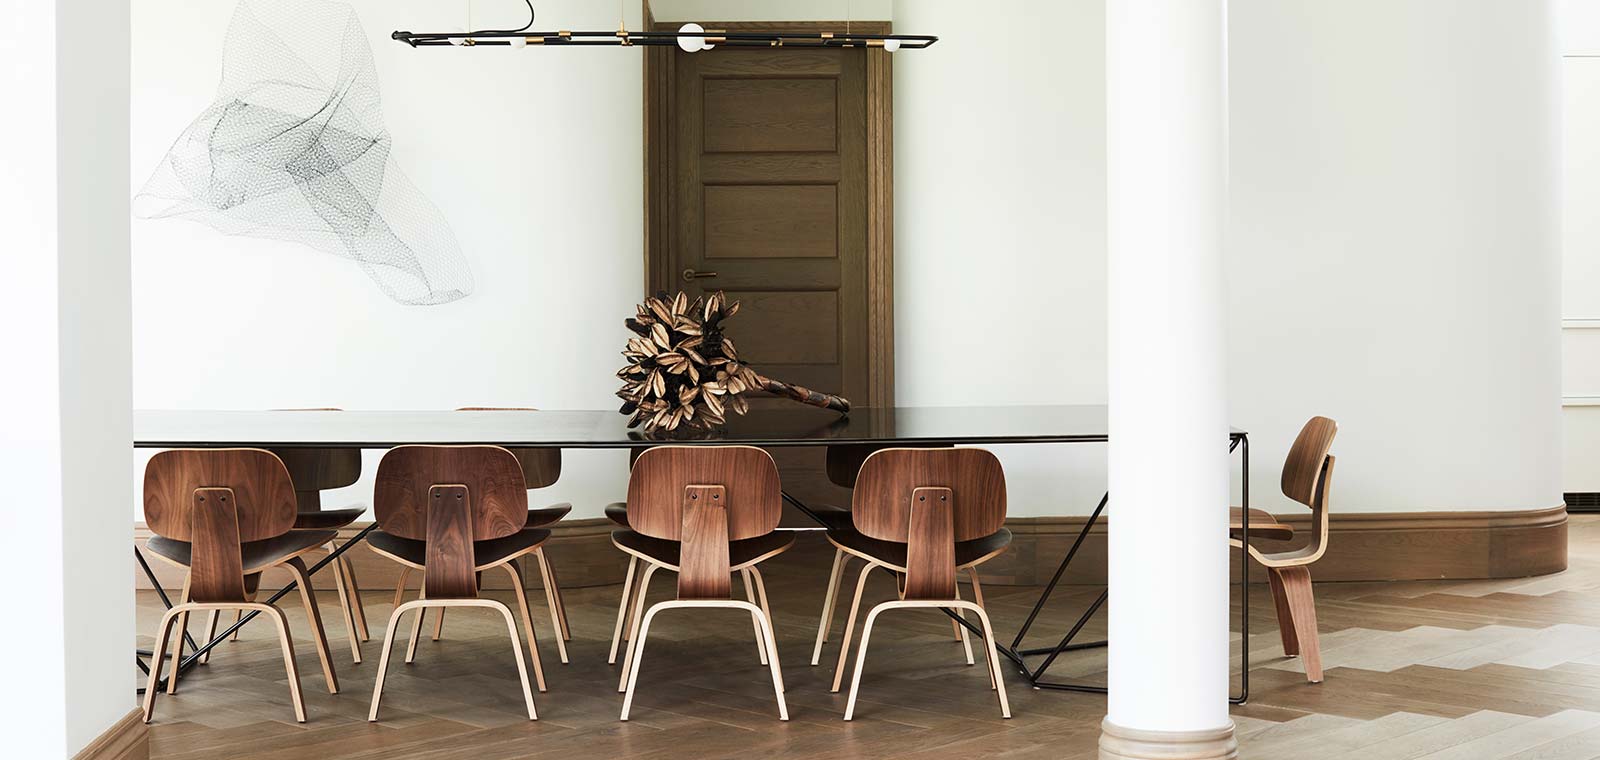 Peppertree Villa 1920s classical home renovated by Luigi Rosselli Architects in Sydney, Australia - dining room design idea